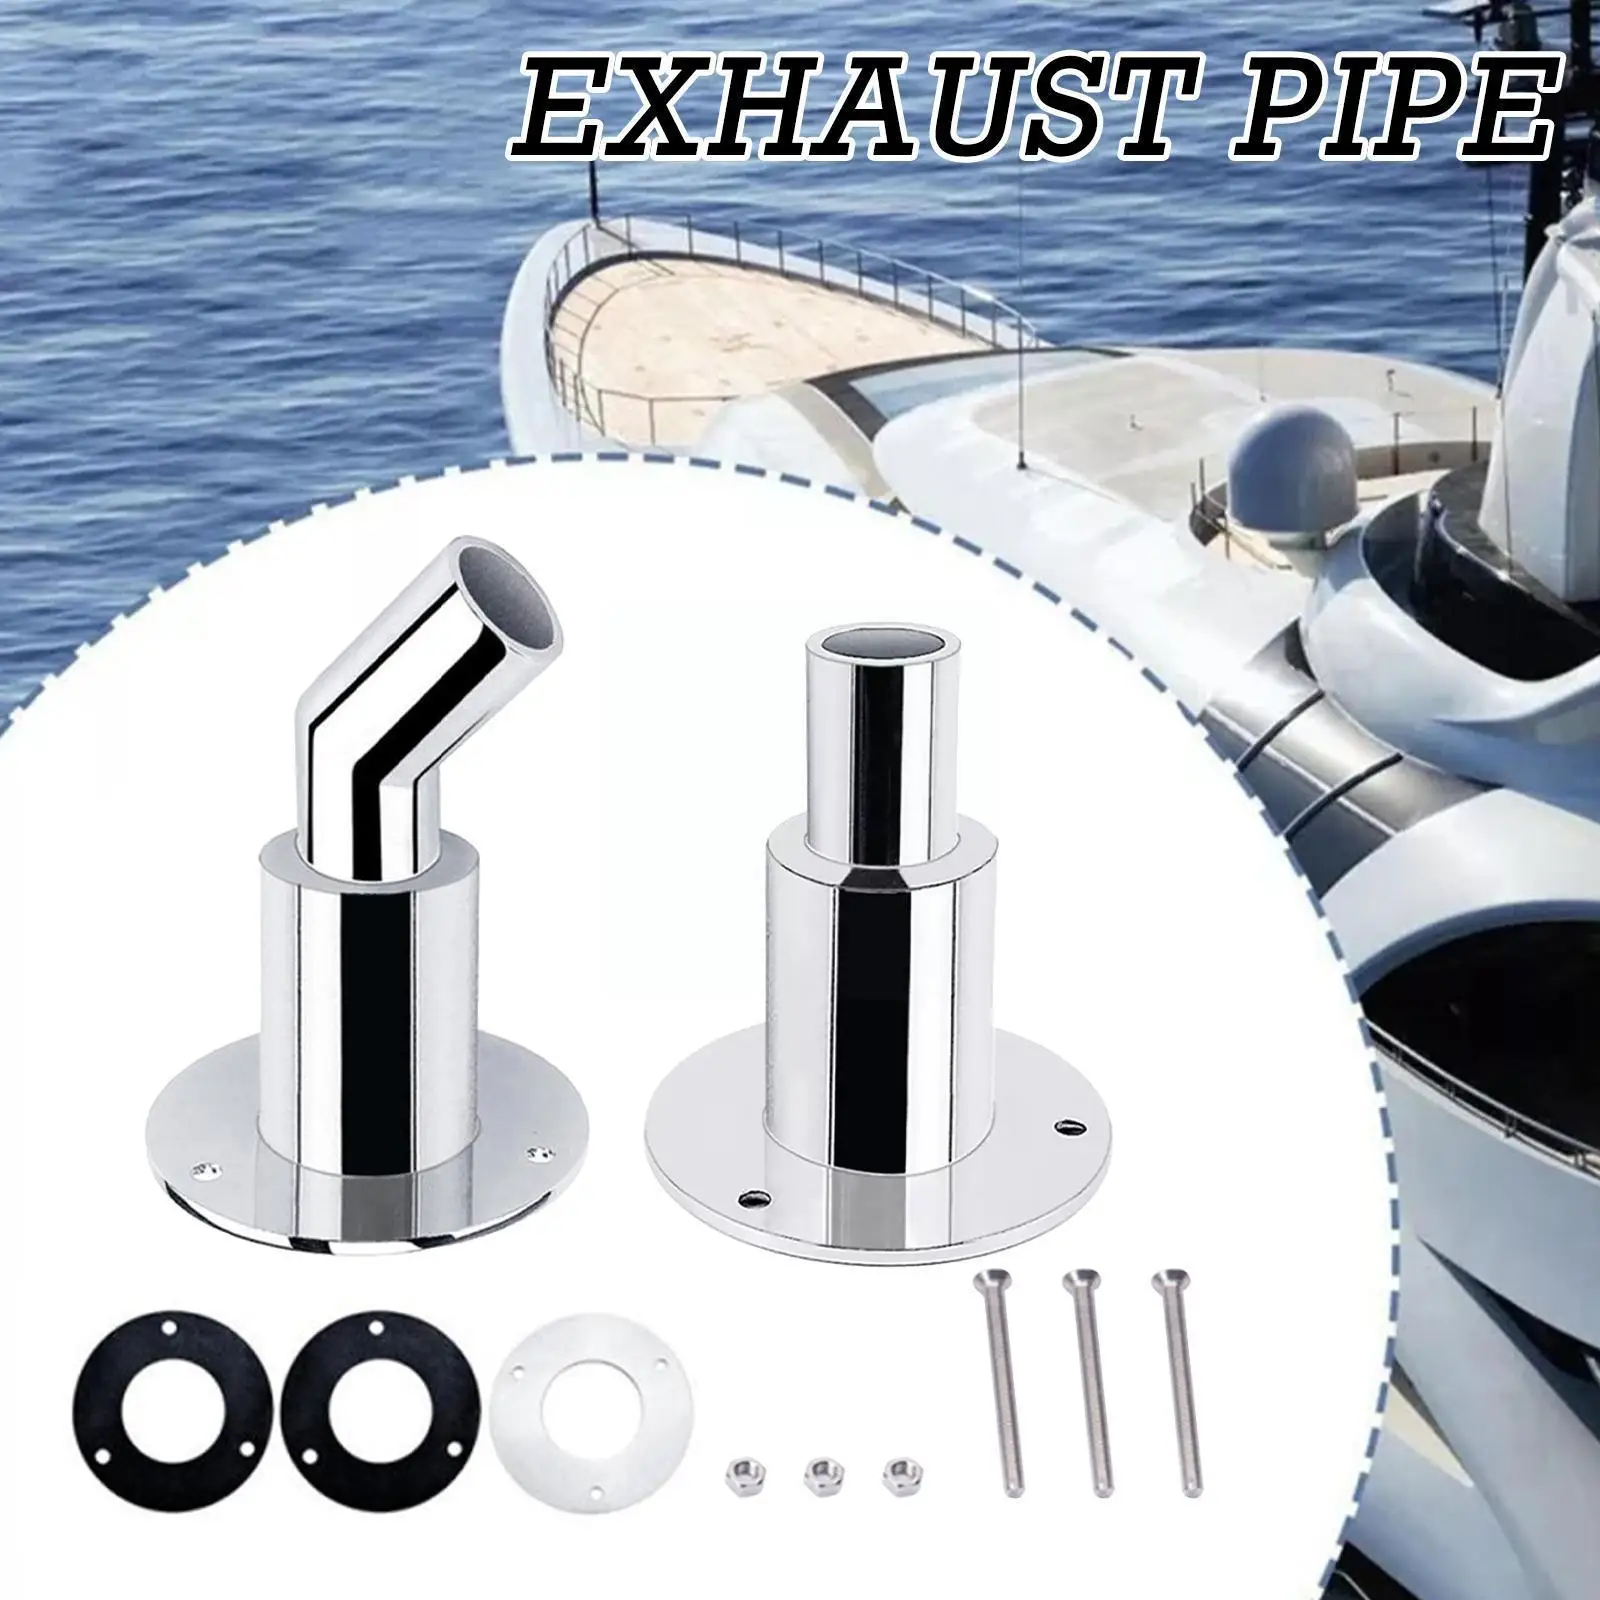 22mm 24mm stainless steel thru hull exhaust fitting tube pipe socket hardware part air diesel heater for boat truck universal Steel Parking Heater Exhaust Fitting Adapter Thru Hardware Of Exhaust Heater Hull Pipe Socket Part For Tube F2o8